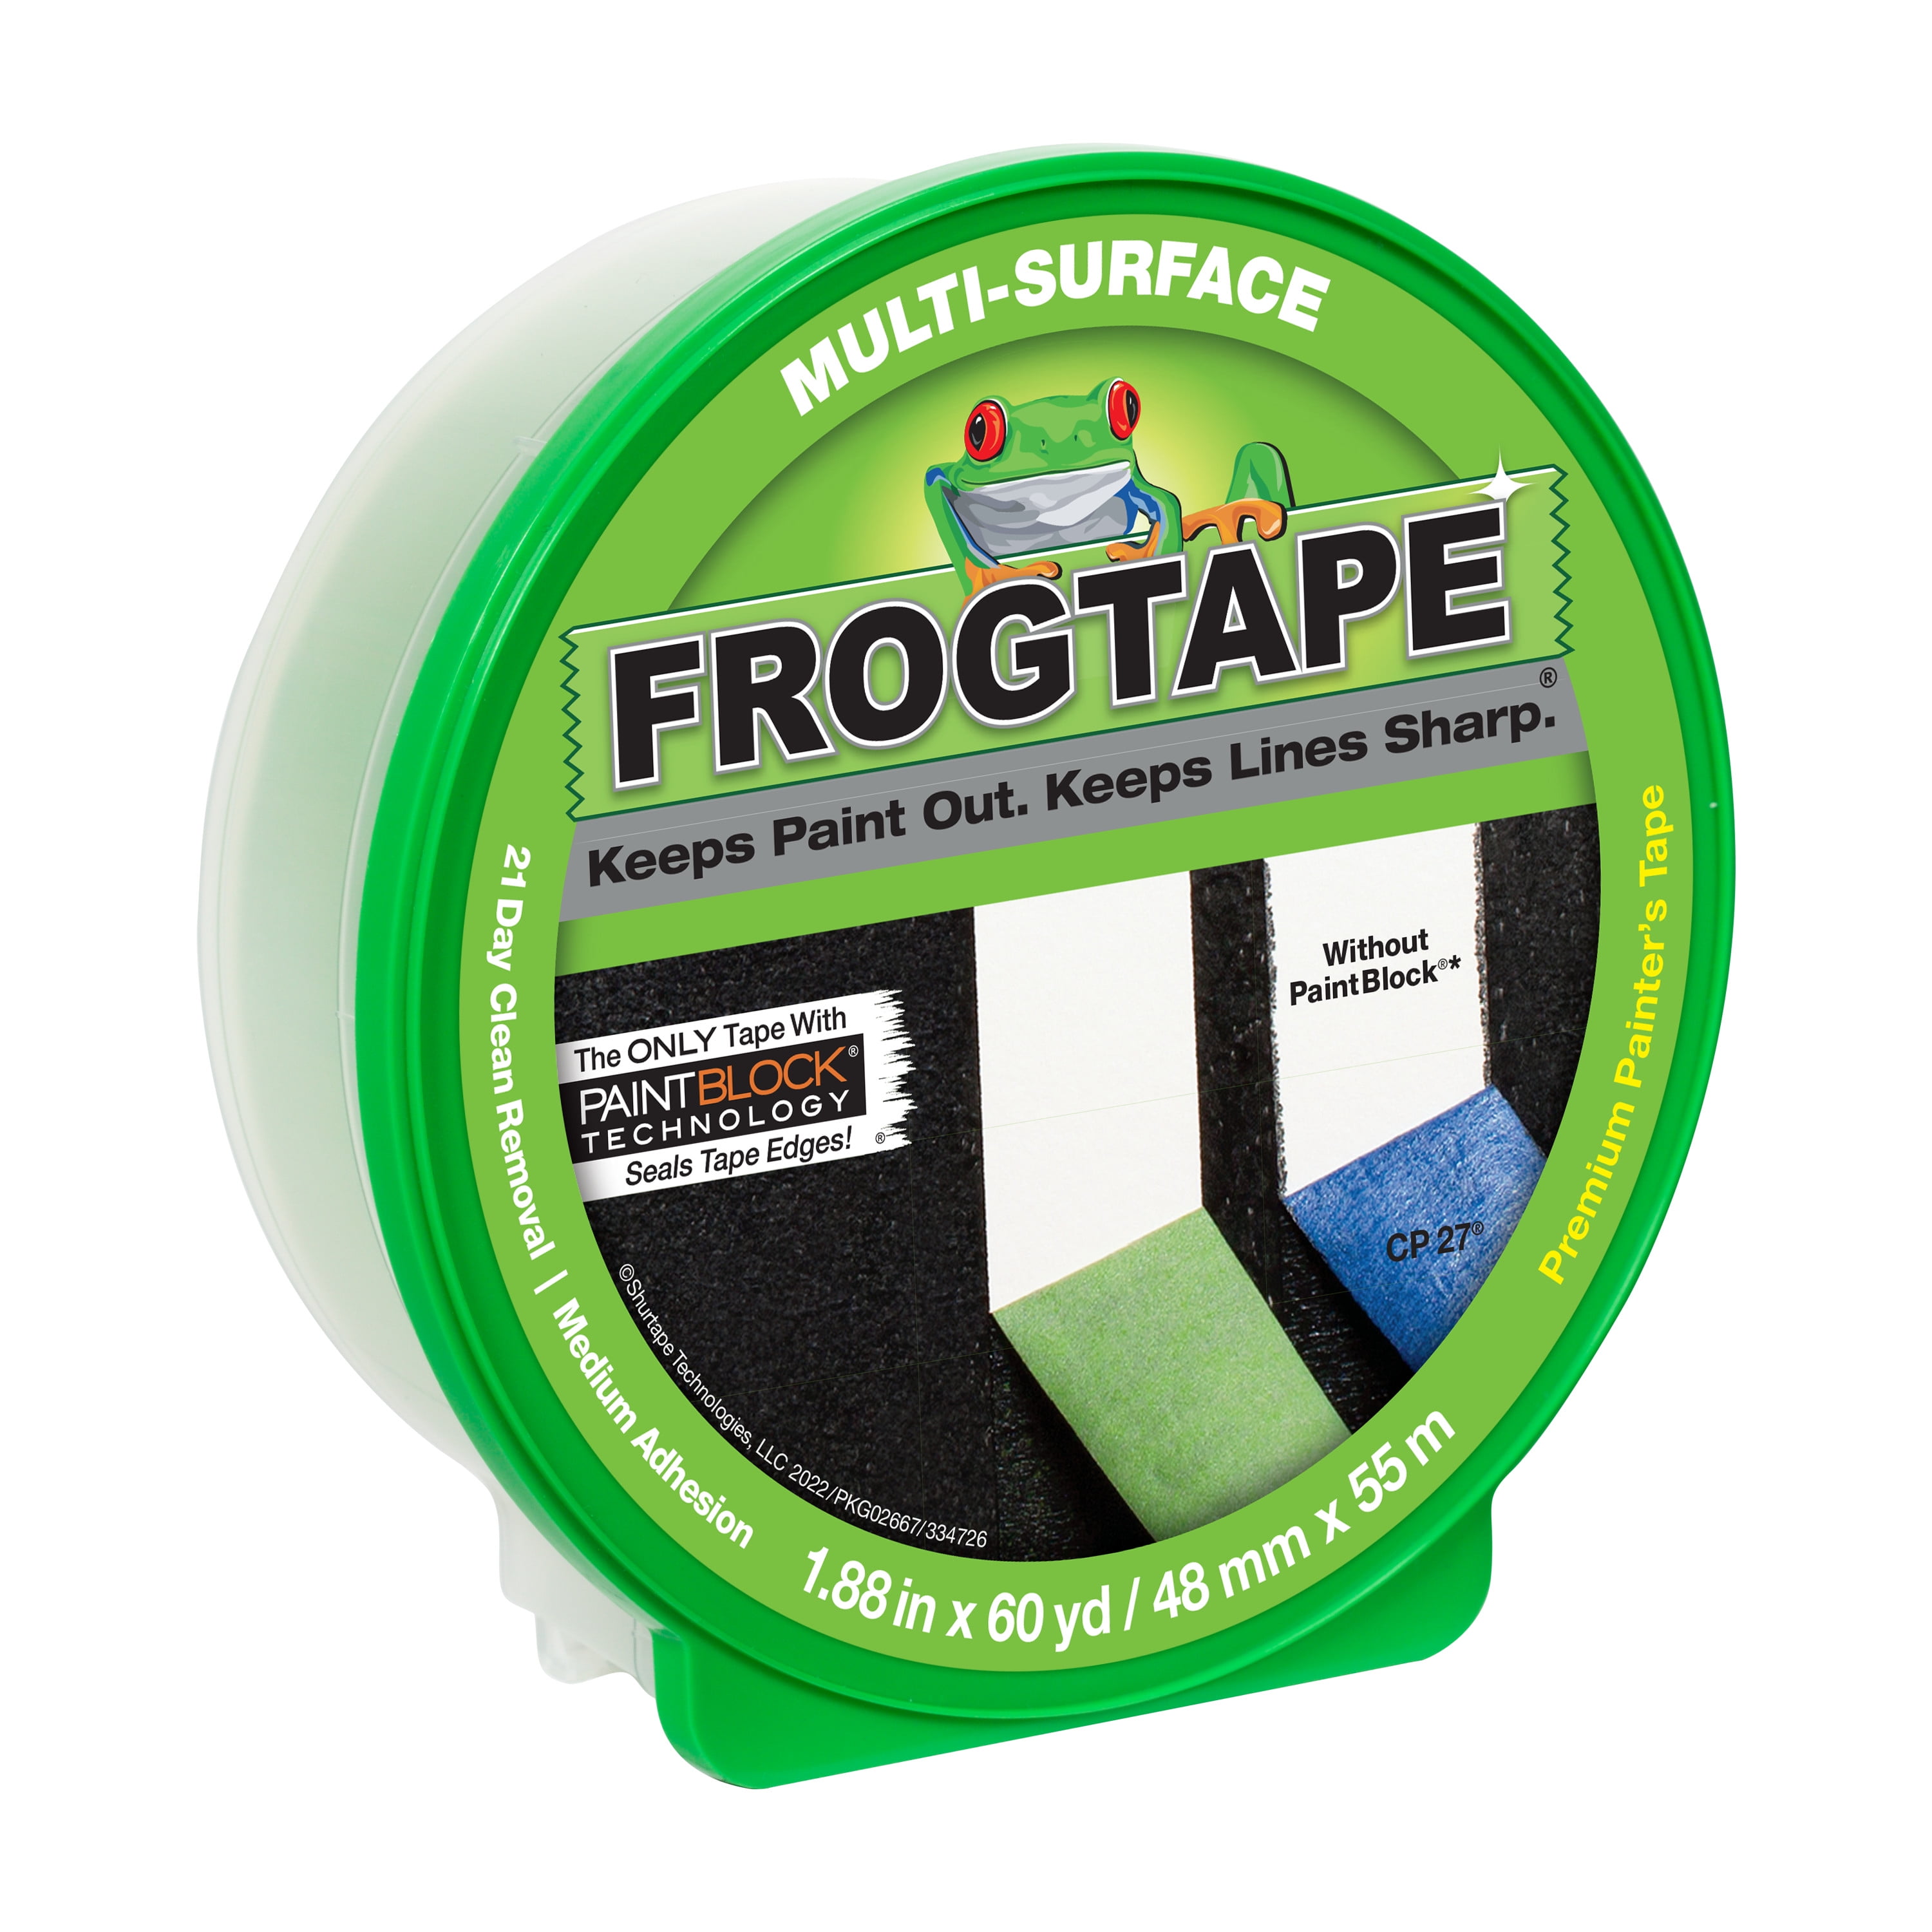 FrogTape 1.88 in. x 60 yd. Green Multi-Surface Painter's Tape